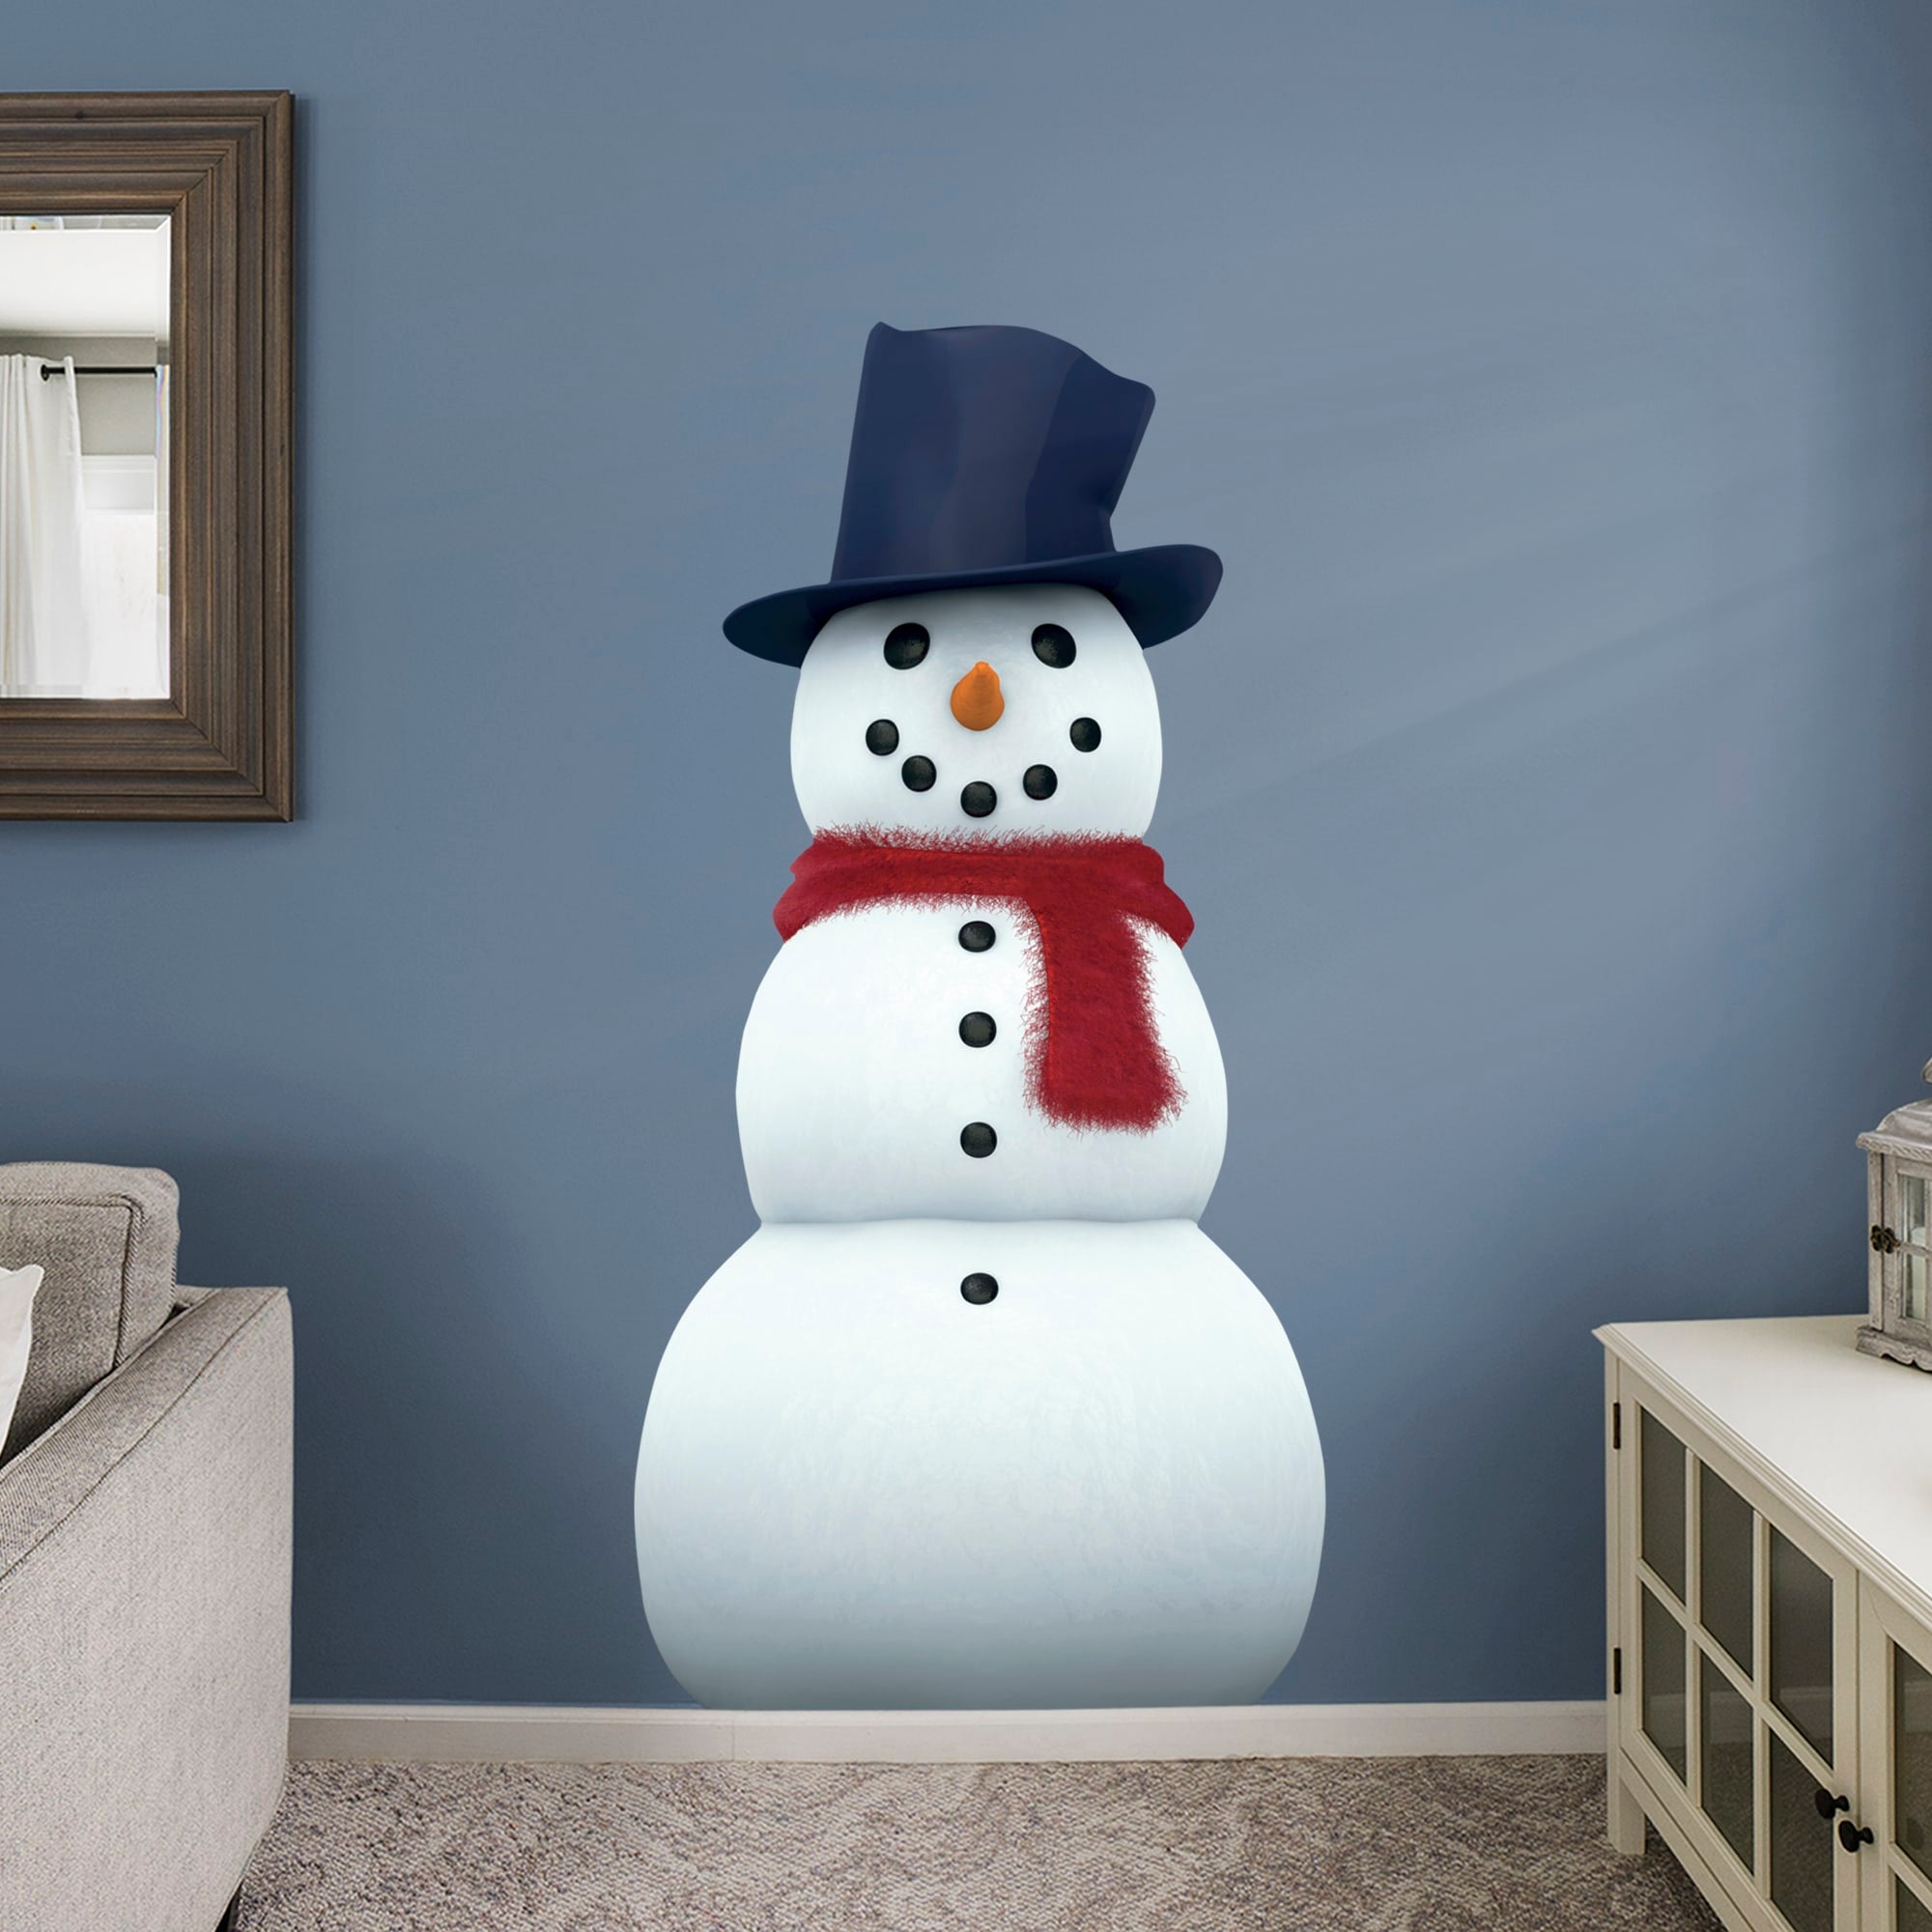 Snowman - Removable Vinyl Decal Life-Size Character (31"W x 68"H) by Fathead